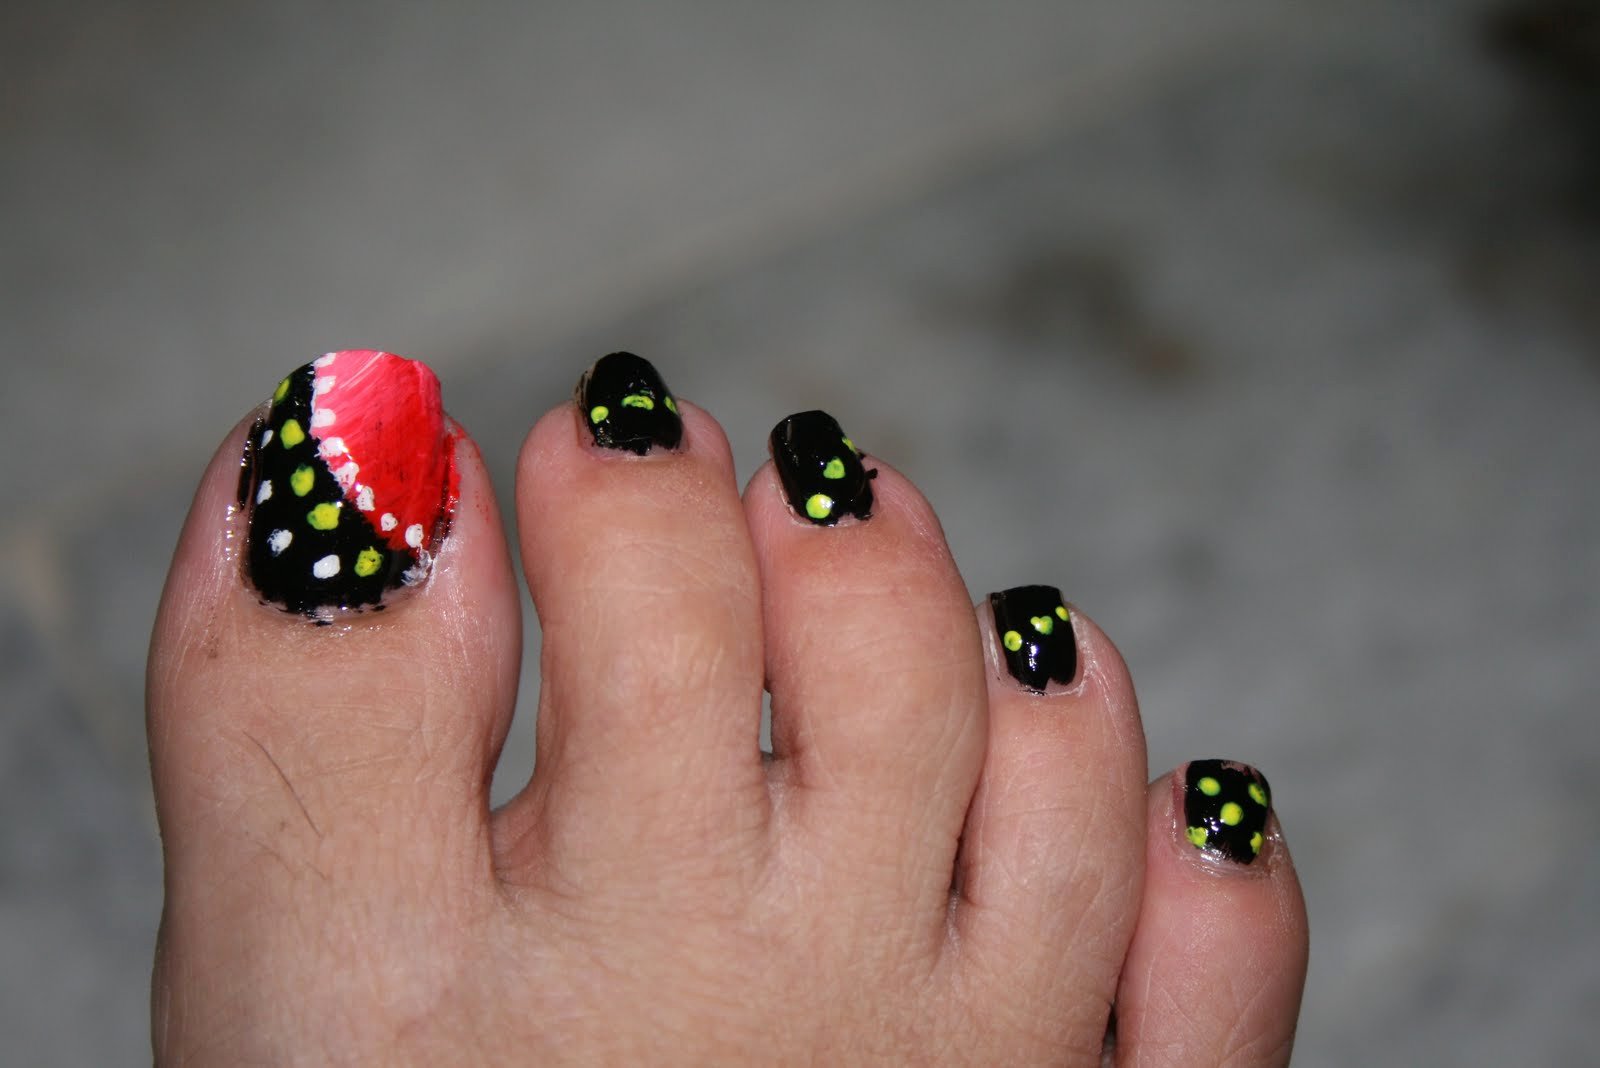 Toes Nails Design Pictures Unique 60 Stylish Black and White Nail Art Designs for toe Nails